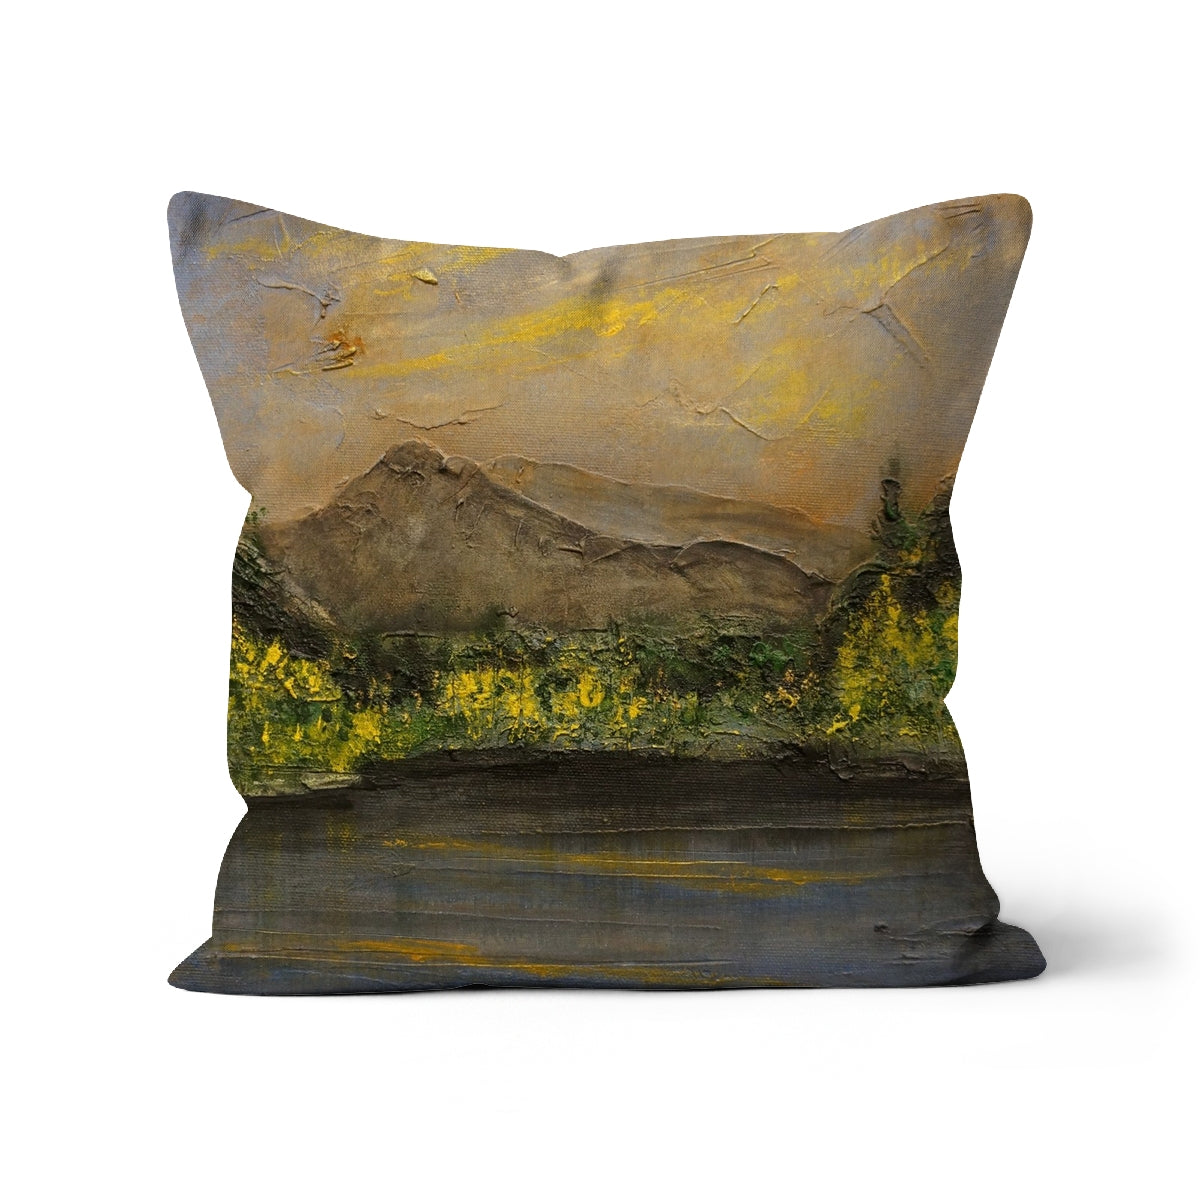 Glencoe Lochan Dusk Art Gifts Cushion-Cushions-Scottish Lochs & Mountains Art Gallery-Faux Suede-18"x18"-Paintings, Prints, Homeware, Art Gifts From Scotland By Scottish Artist Kevin Hunter